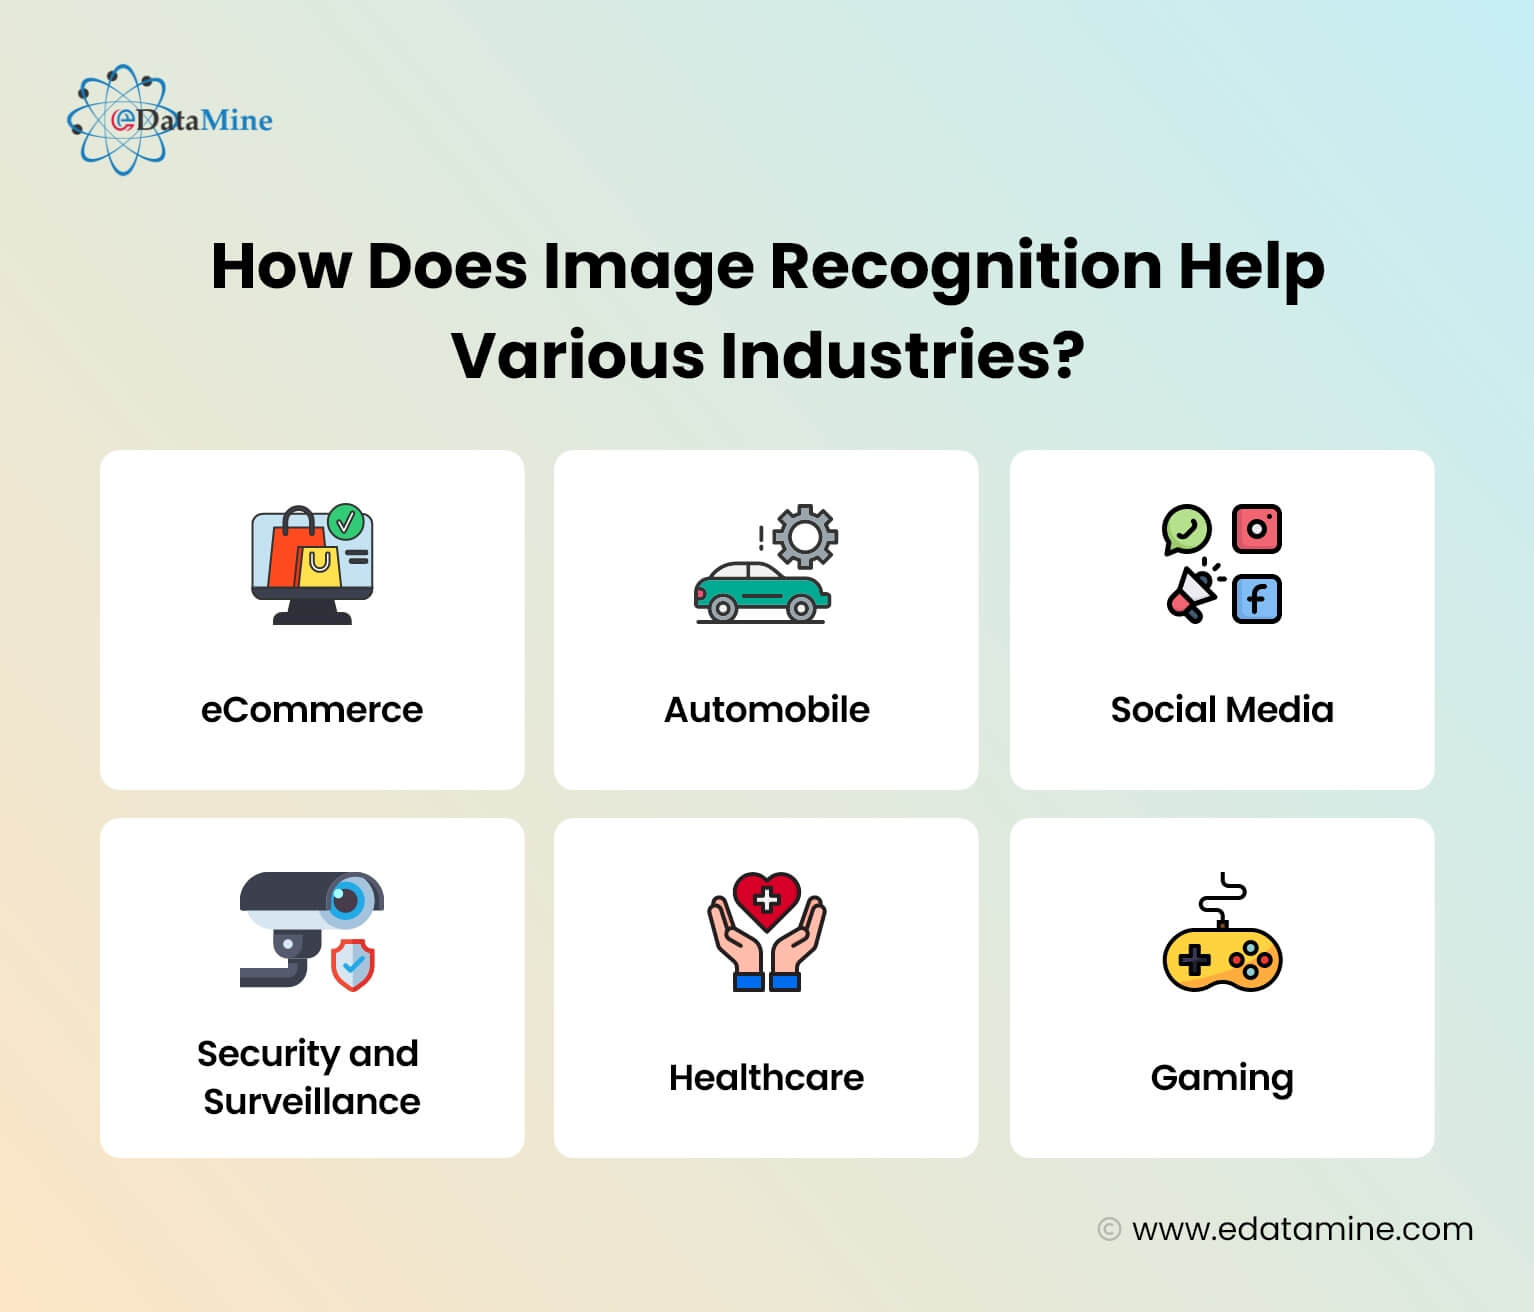 How Does Image Recognition Help Various Industries